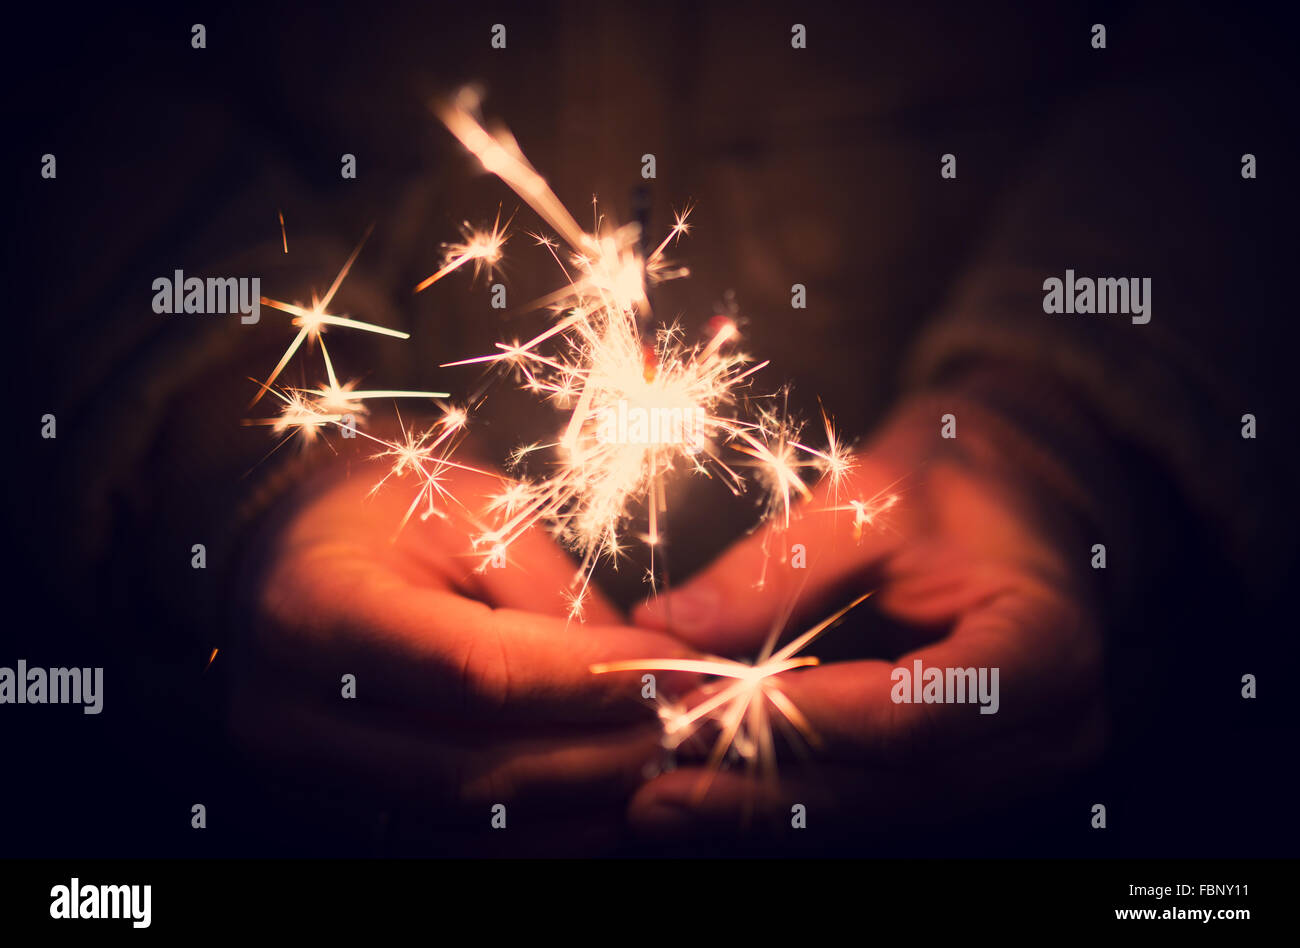 Man holding bright festive Christmas sparkler in hand, tinted ph Stock Photo